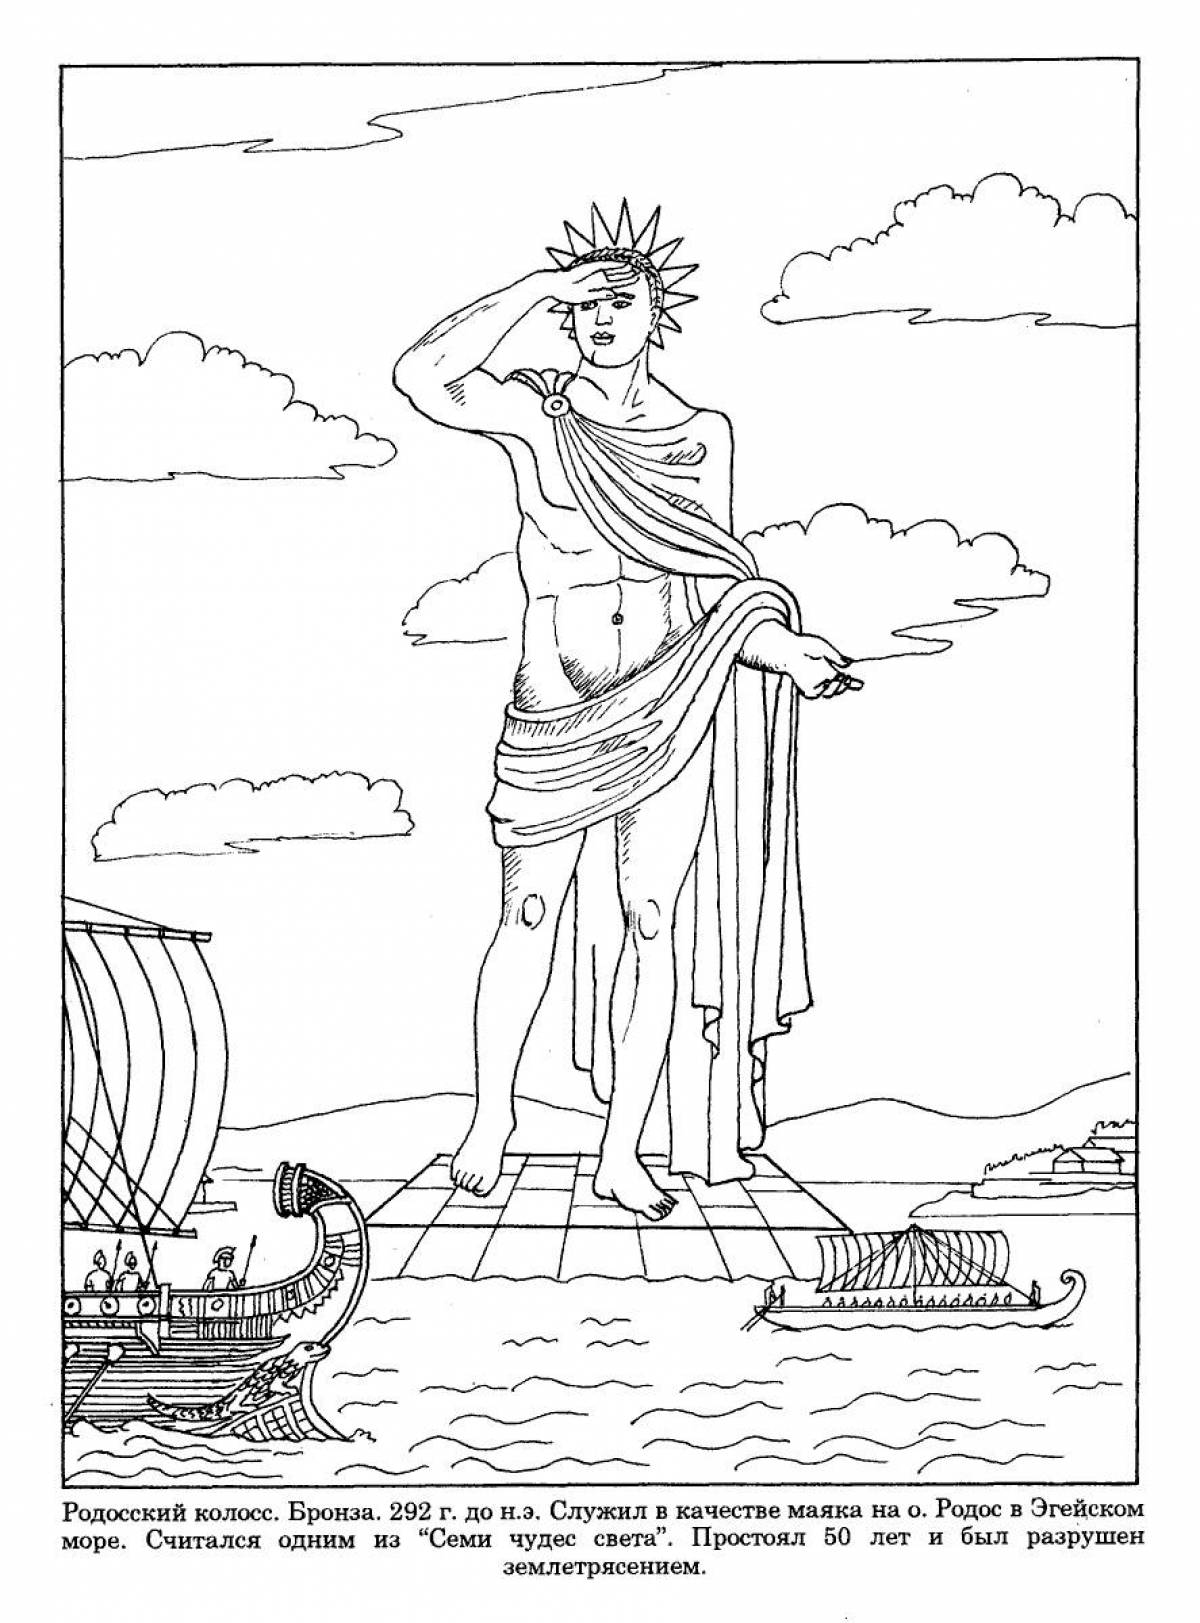 Photo Colossus of rhodes